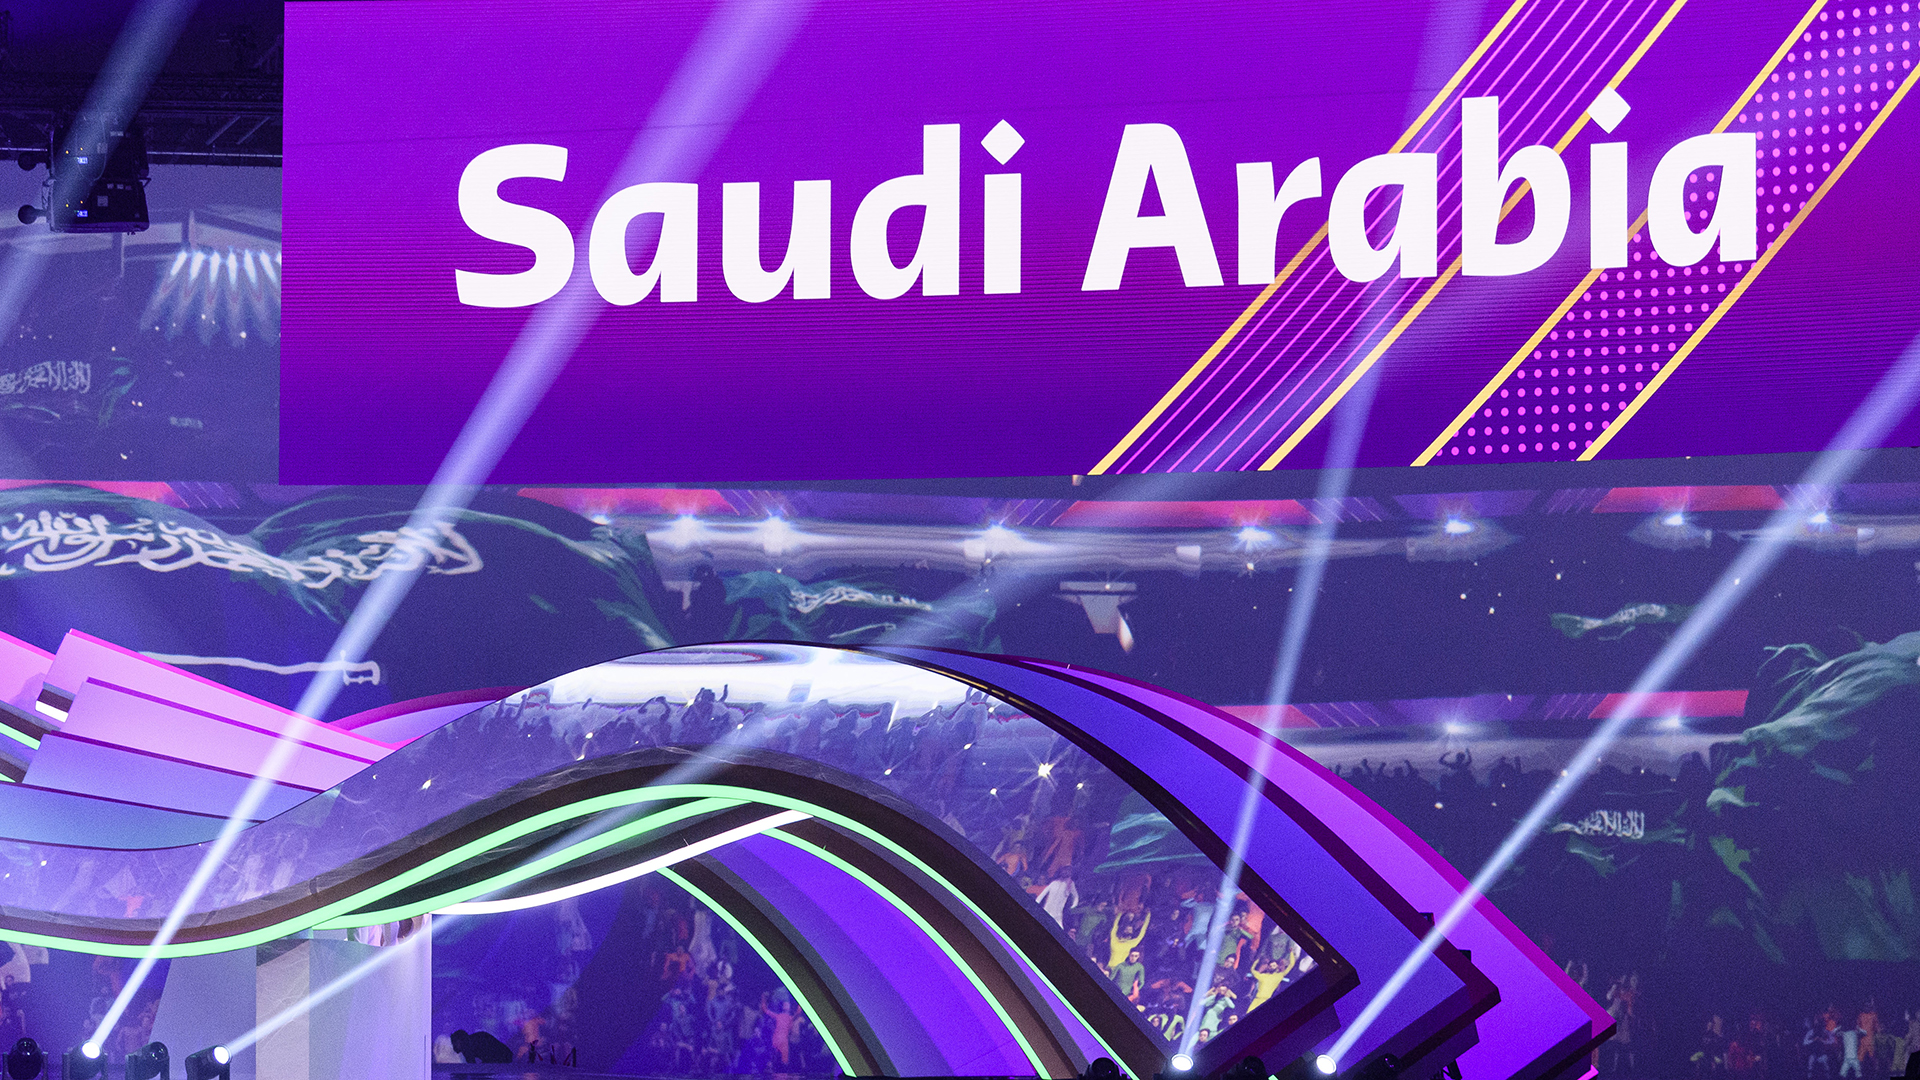 A general view of the performance as Saudi Arabia is displayed on the LED Screen during the FIFA World Cup Qatar 2022 Final Draw at Doha Exhibition Center on April 1, 2022 in Doha, Qatar.